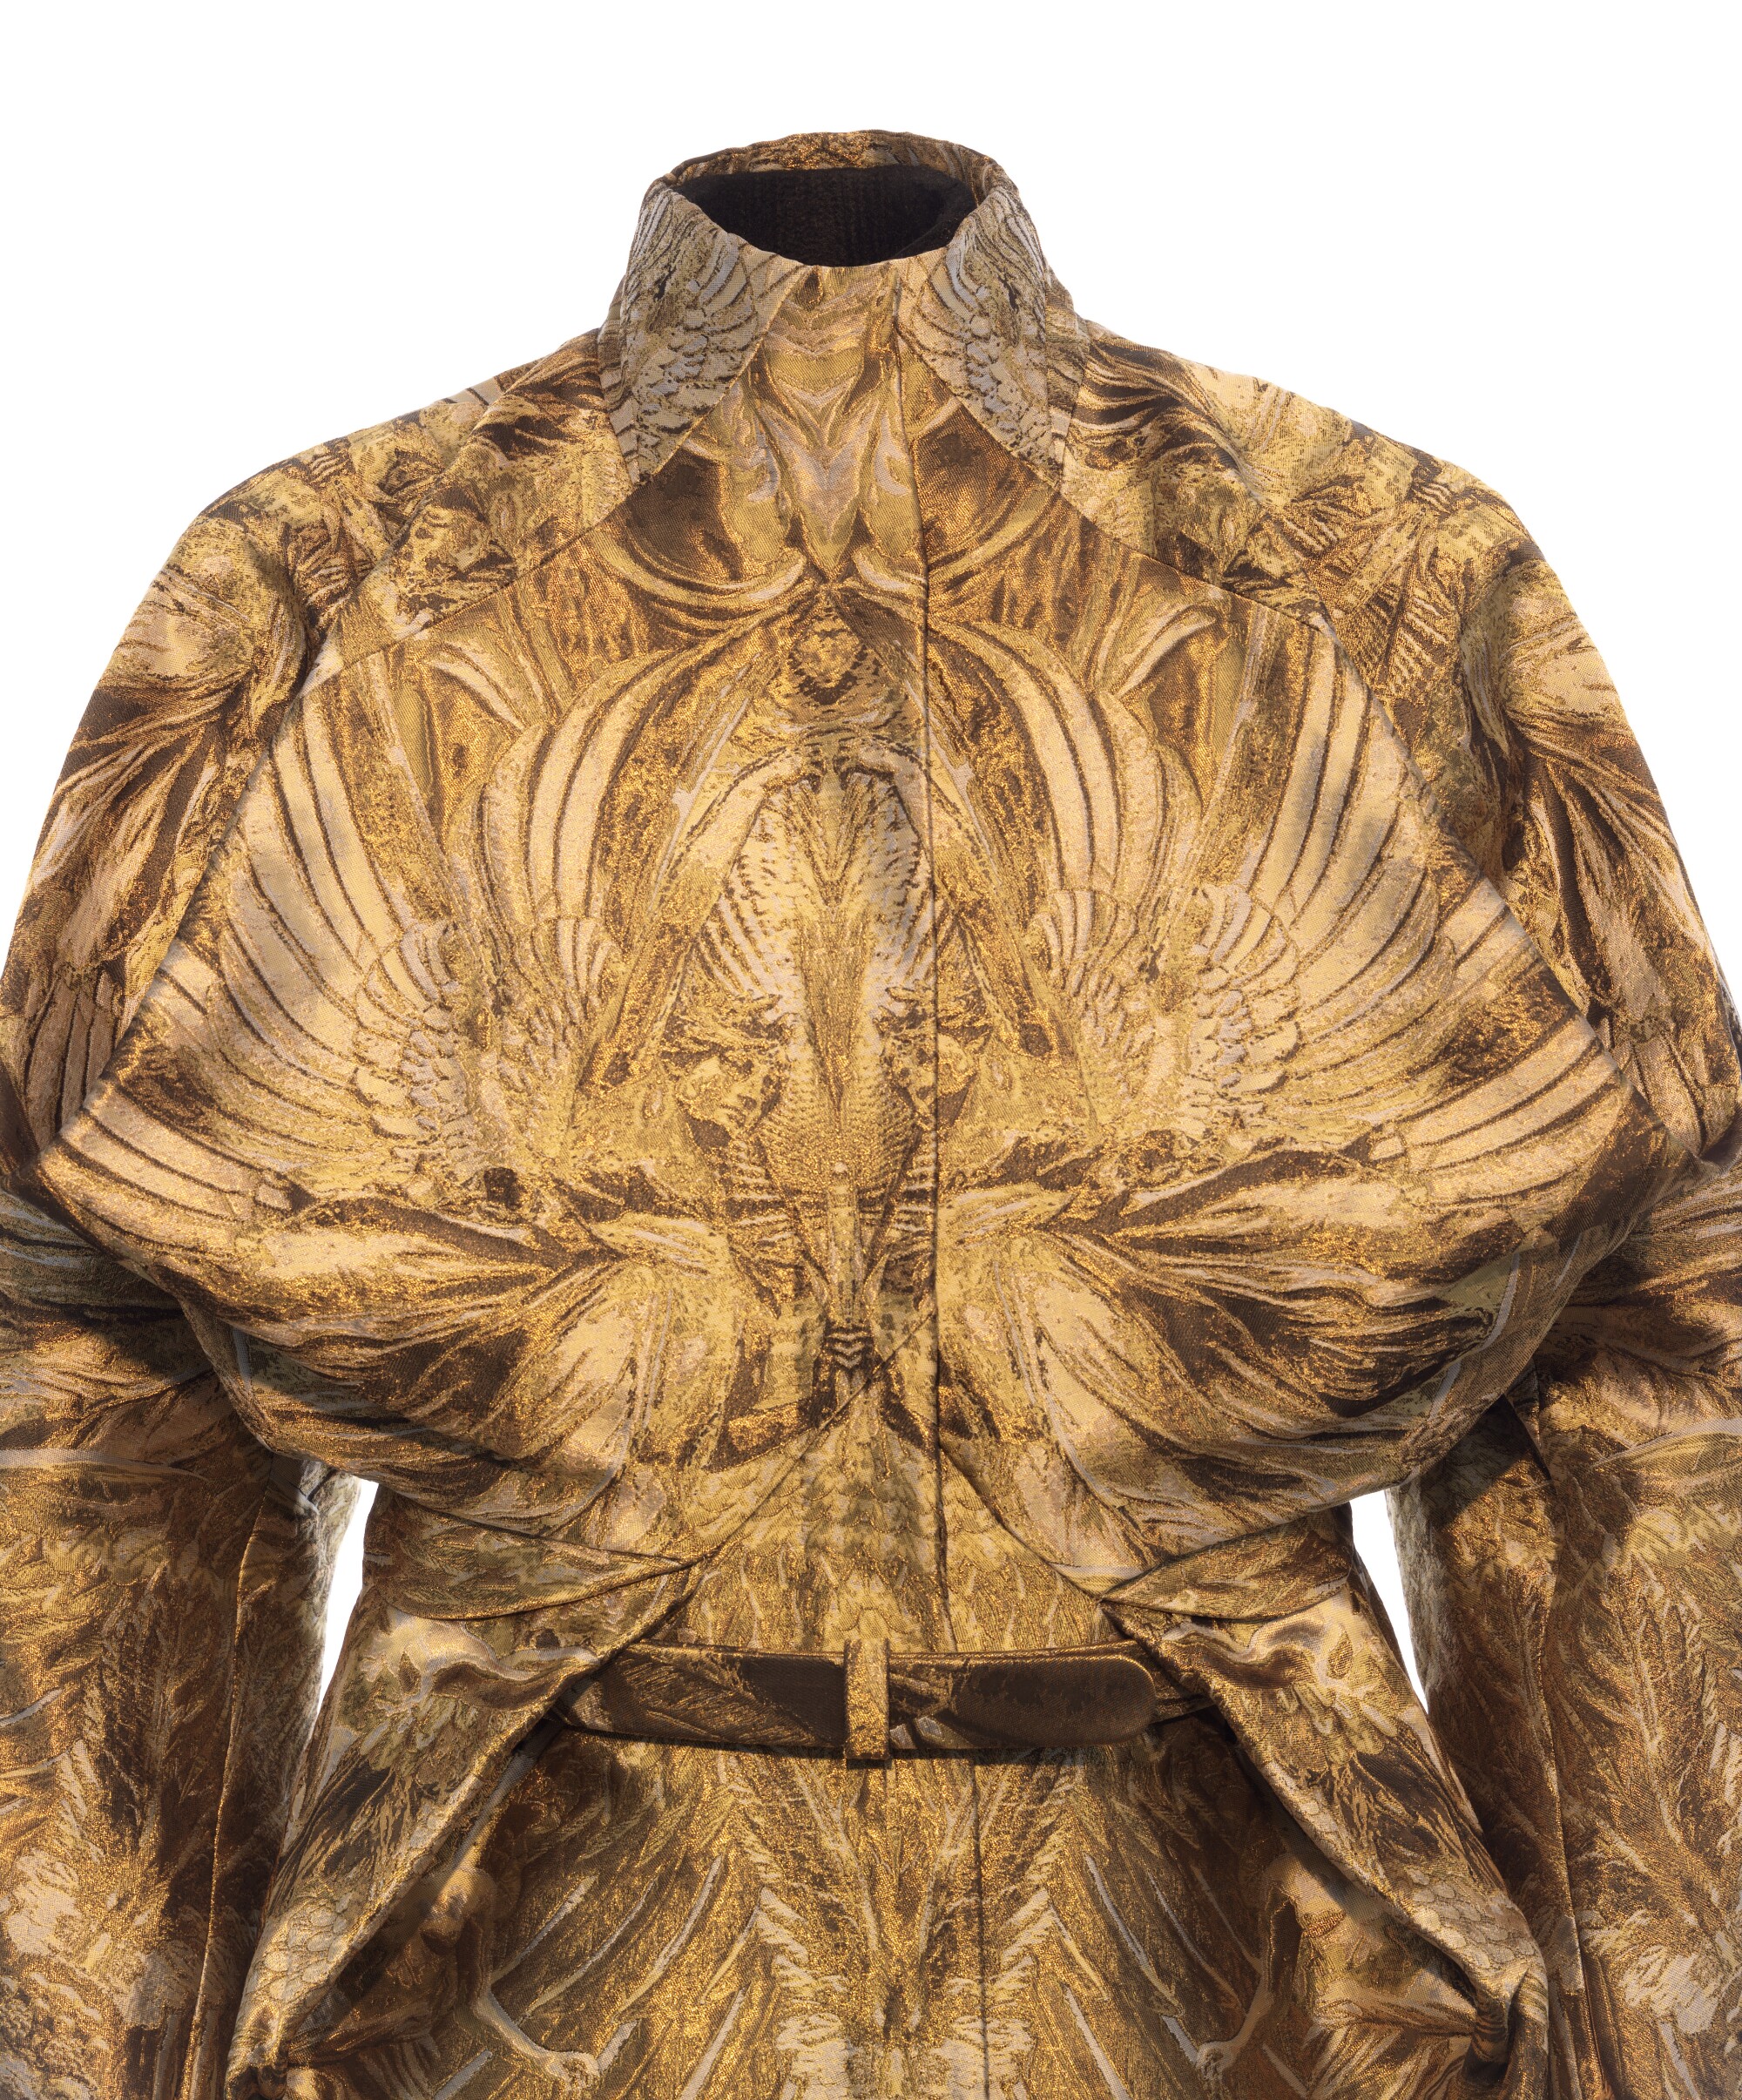 4Alexander McQueen, Woman's Jacket (detail) from the Untitled (Angels and Demons) collection